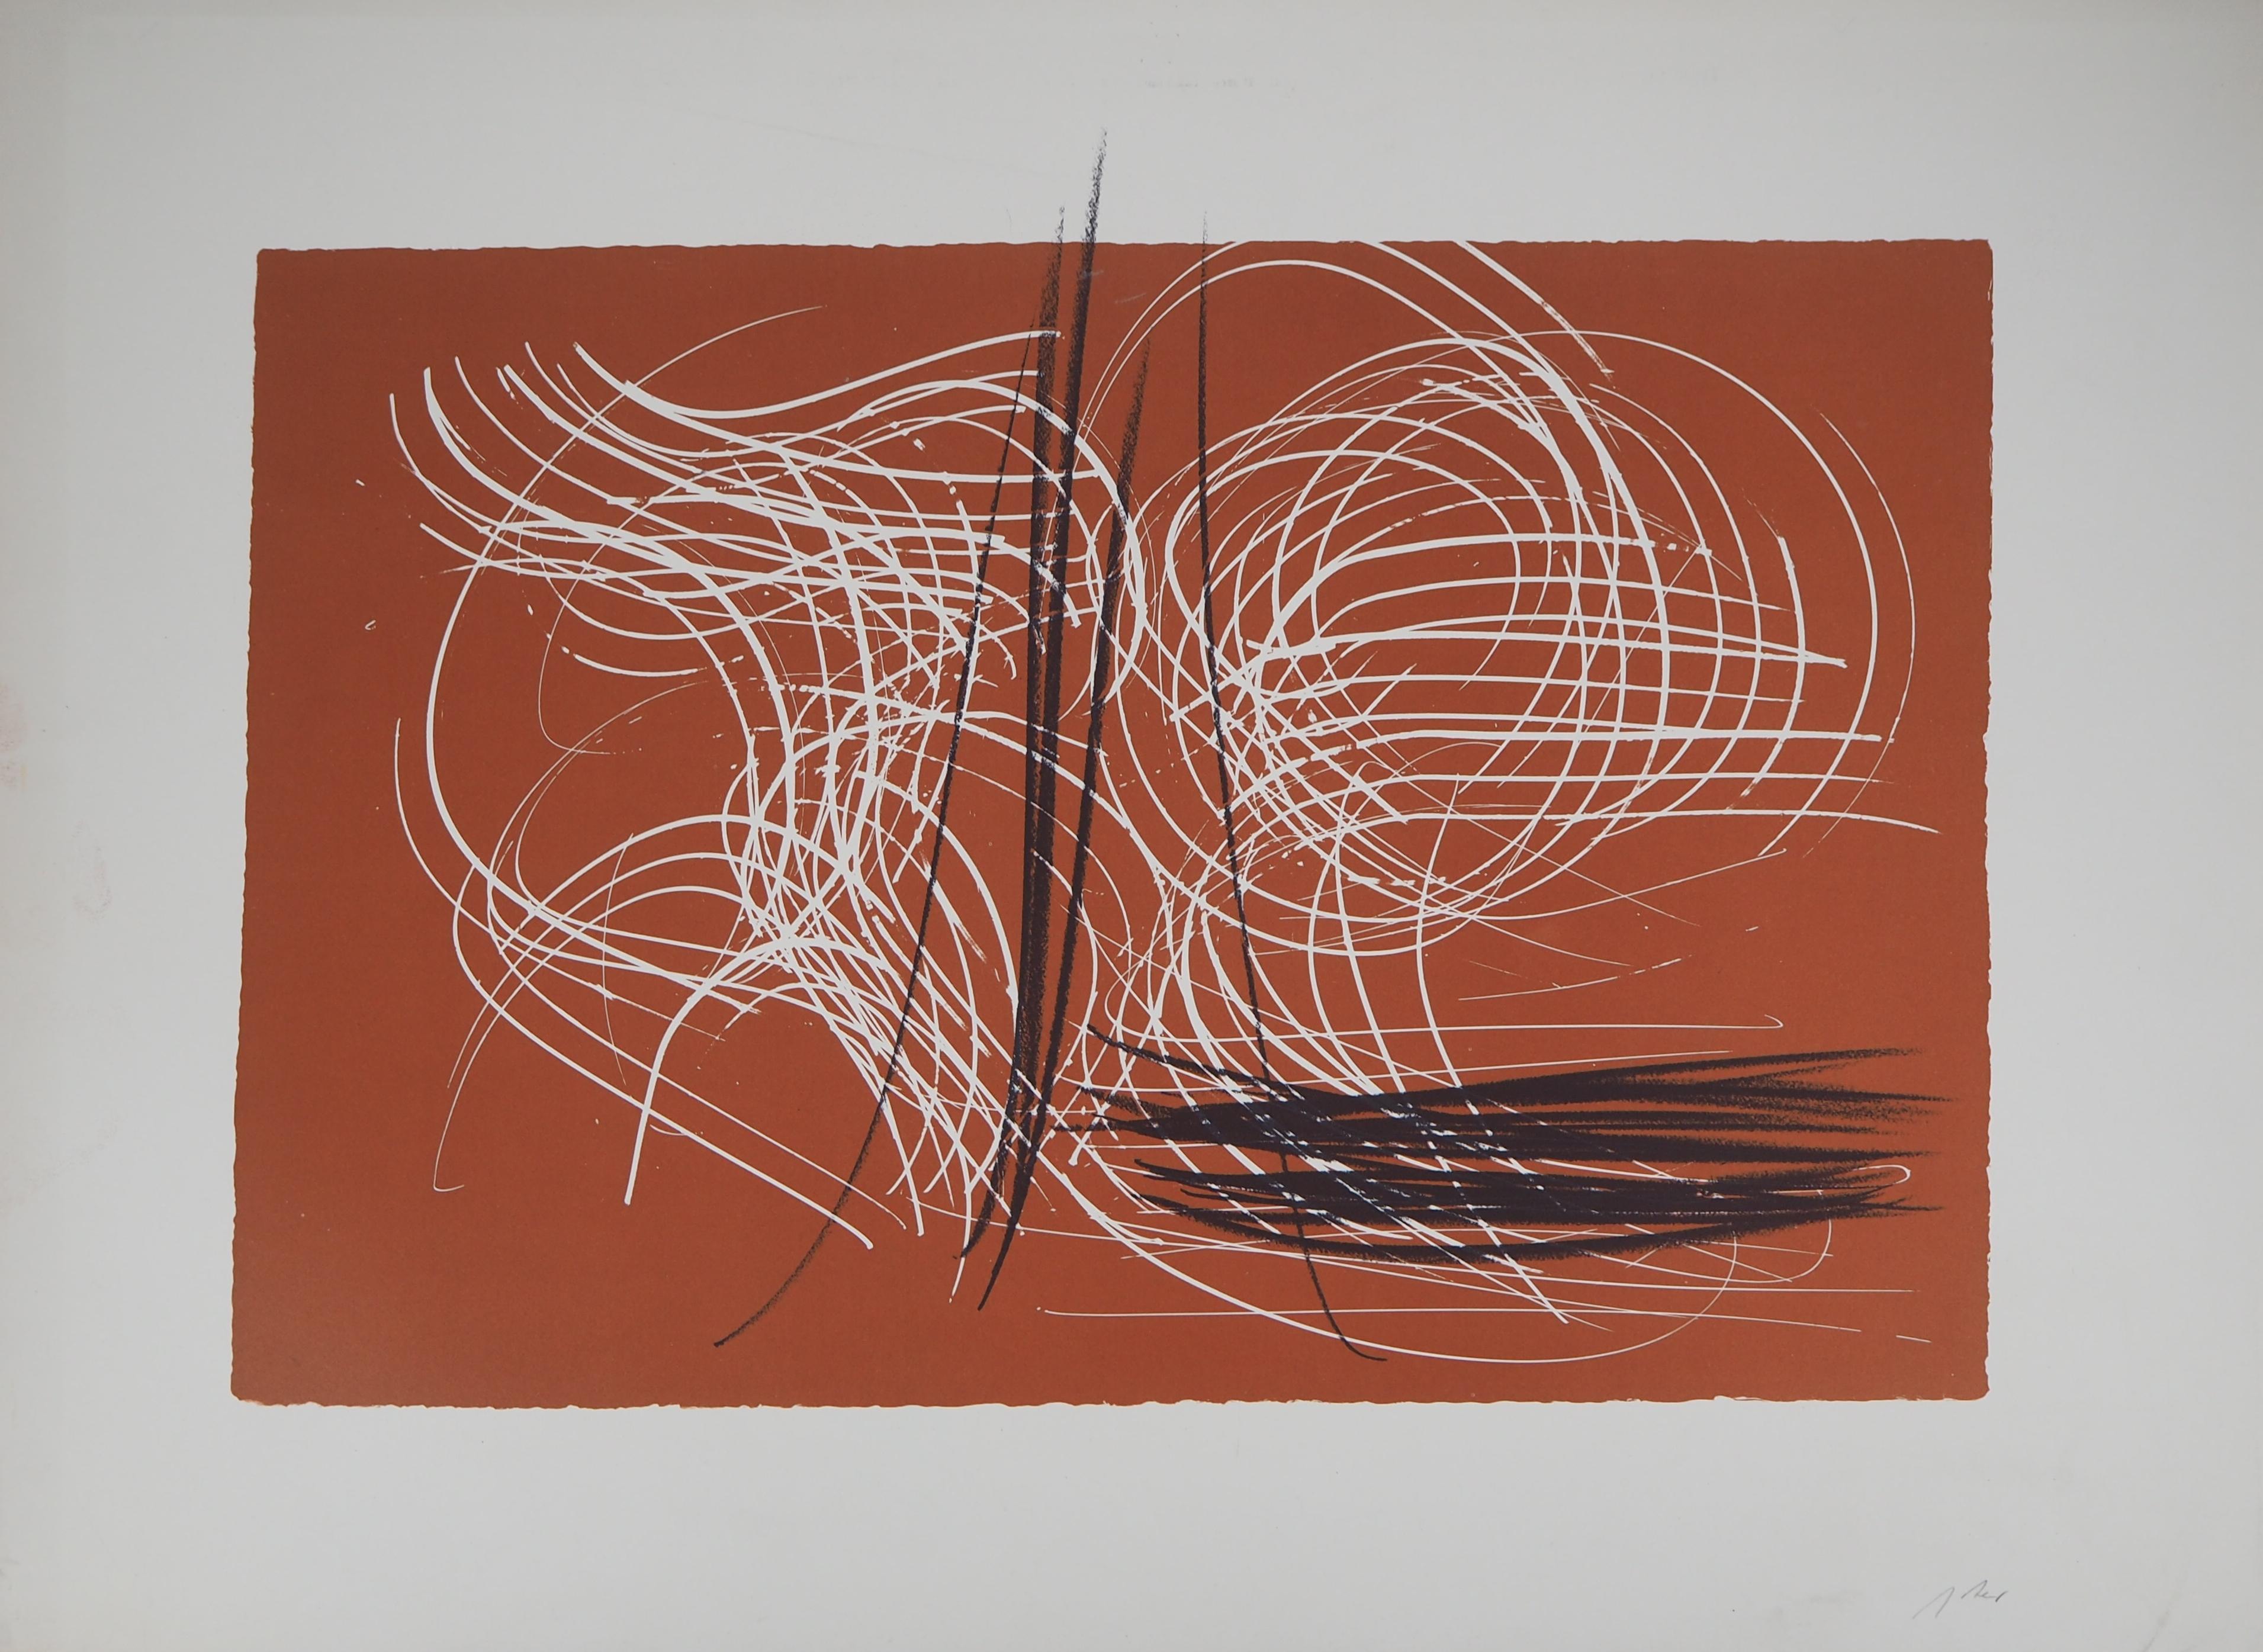 Brown Abstract Composition - Original Lithograph, 1971